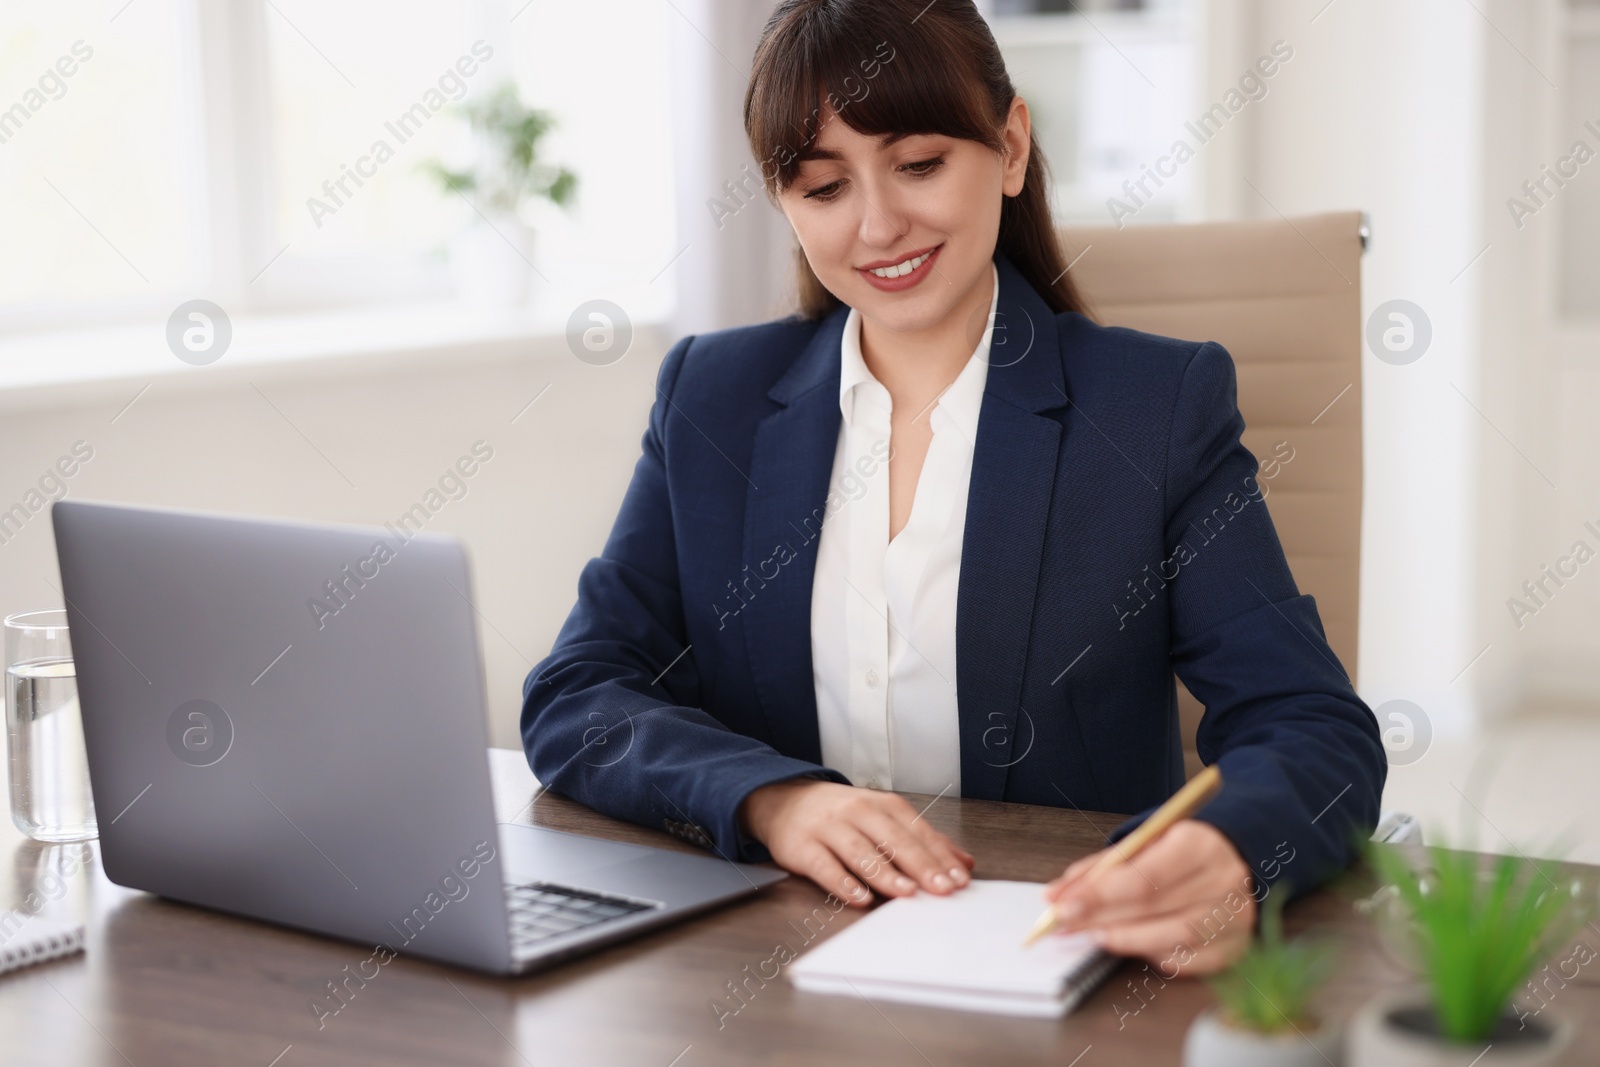 Photo of Woman taking notes during webinar at wooden table indoors